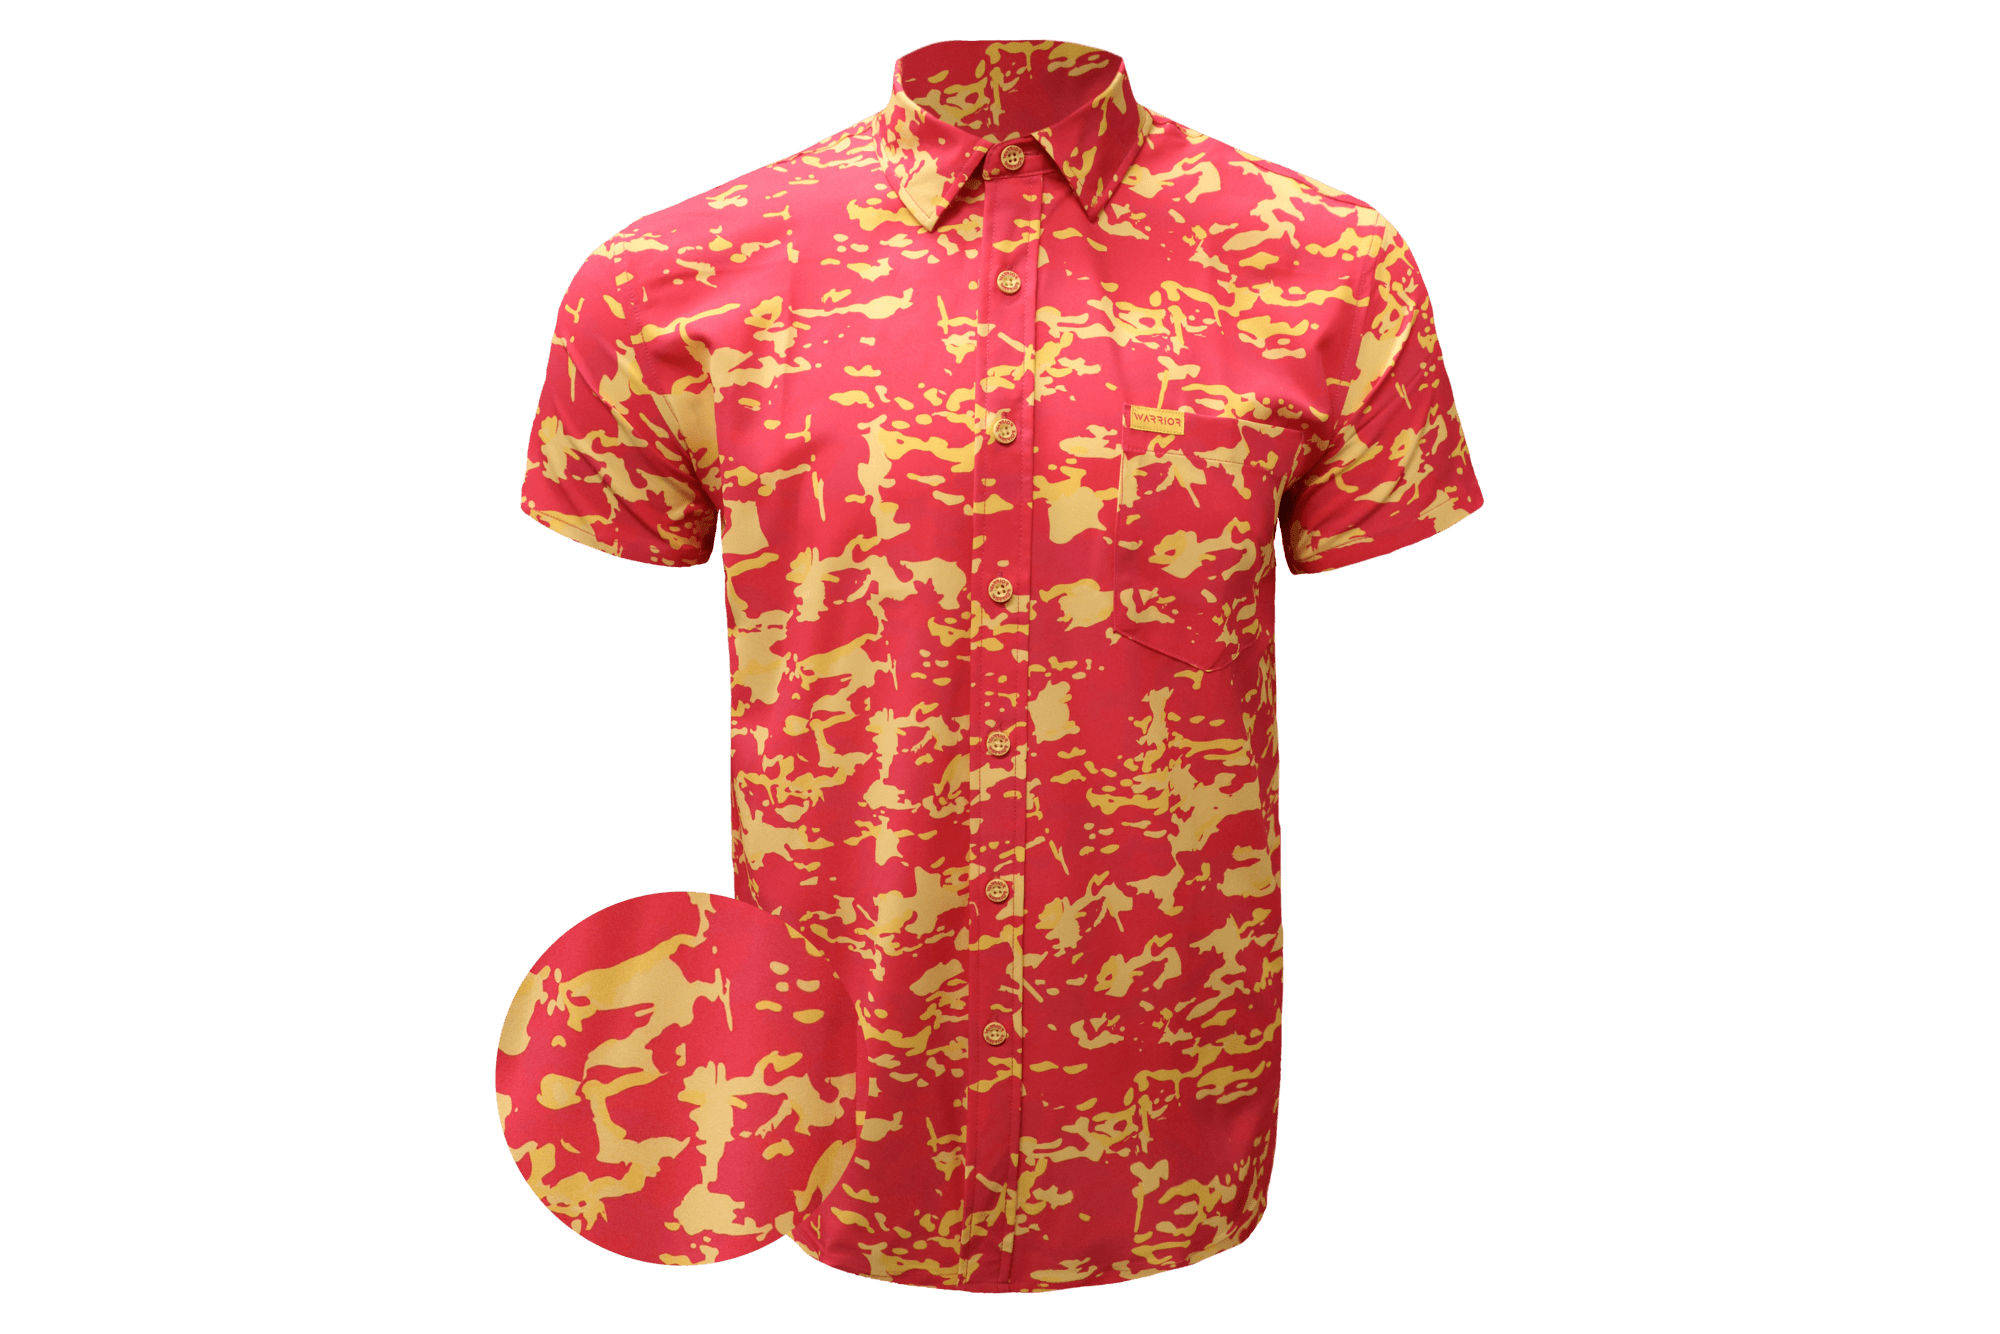 Neon Stealth Print BDs – Warrior Company